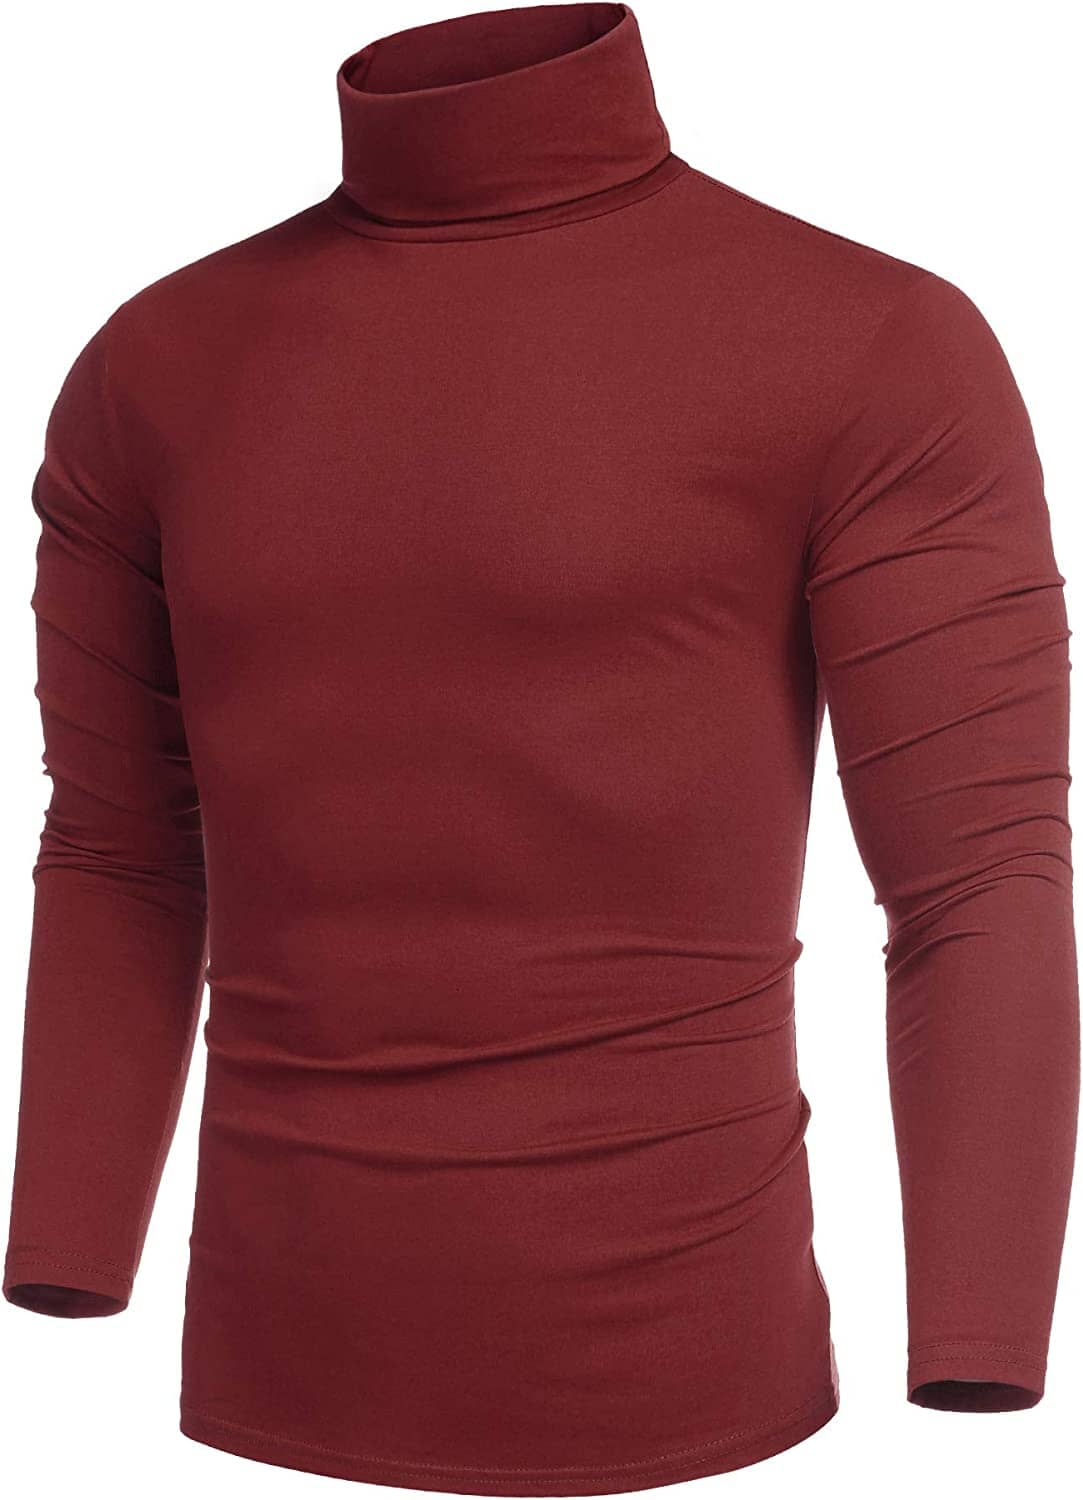 Slim Fit Turtleneck Basic Cotton Sweater (US Only) Sweaters COOFANDY Store Wine Red S 